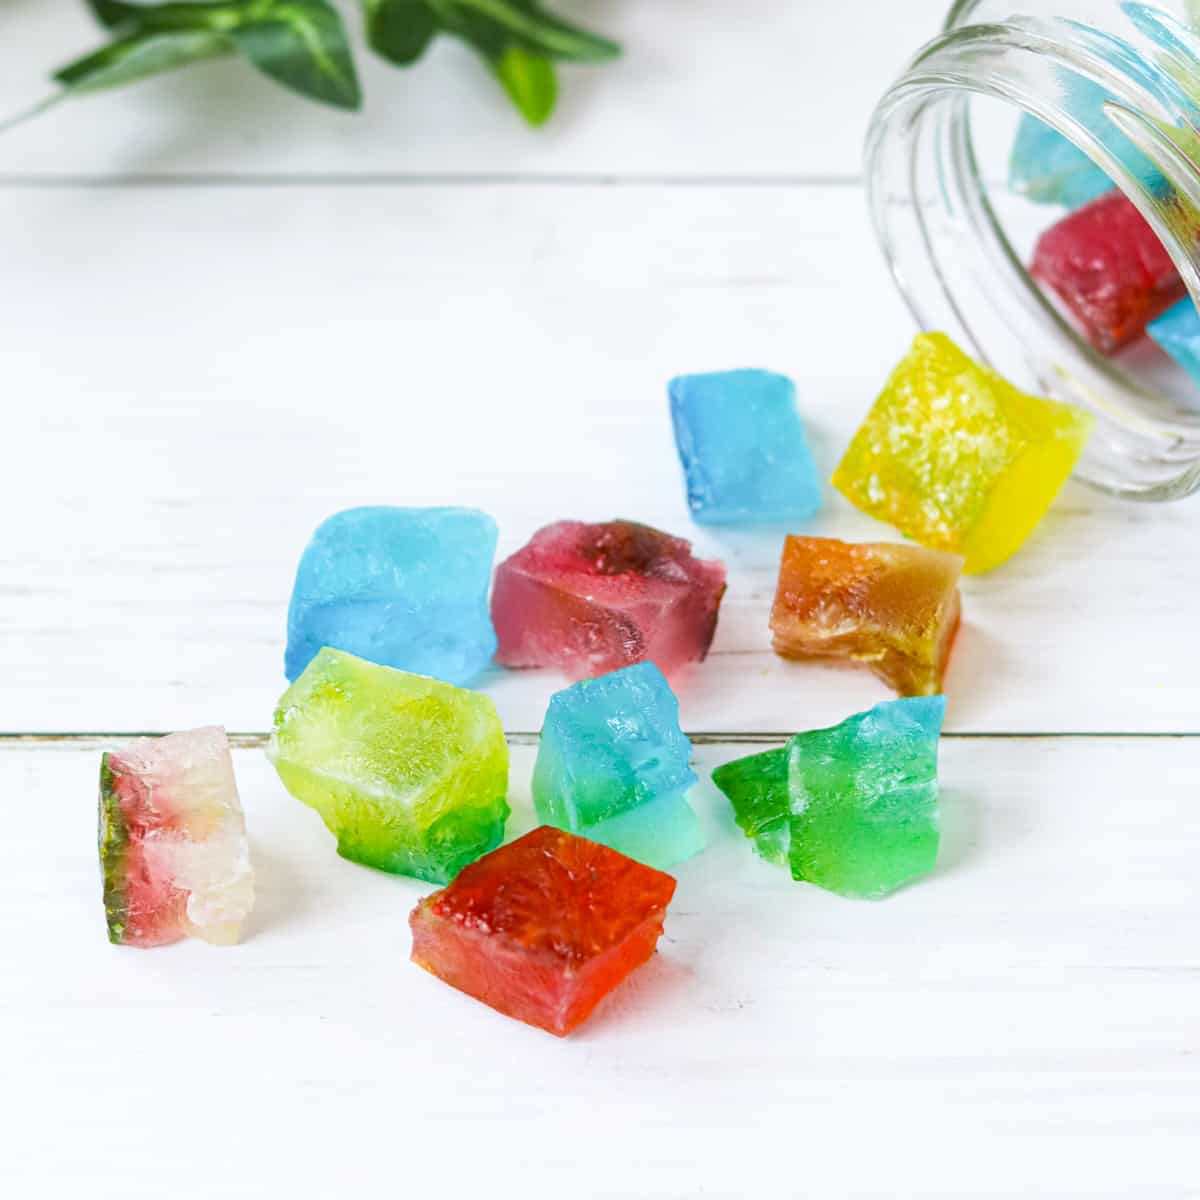 Crispy Dried Agar Jelly Candy - Messy Vegan Cook